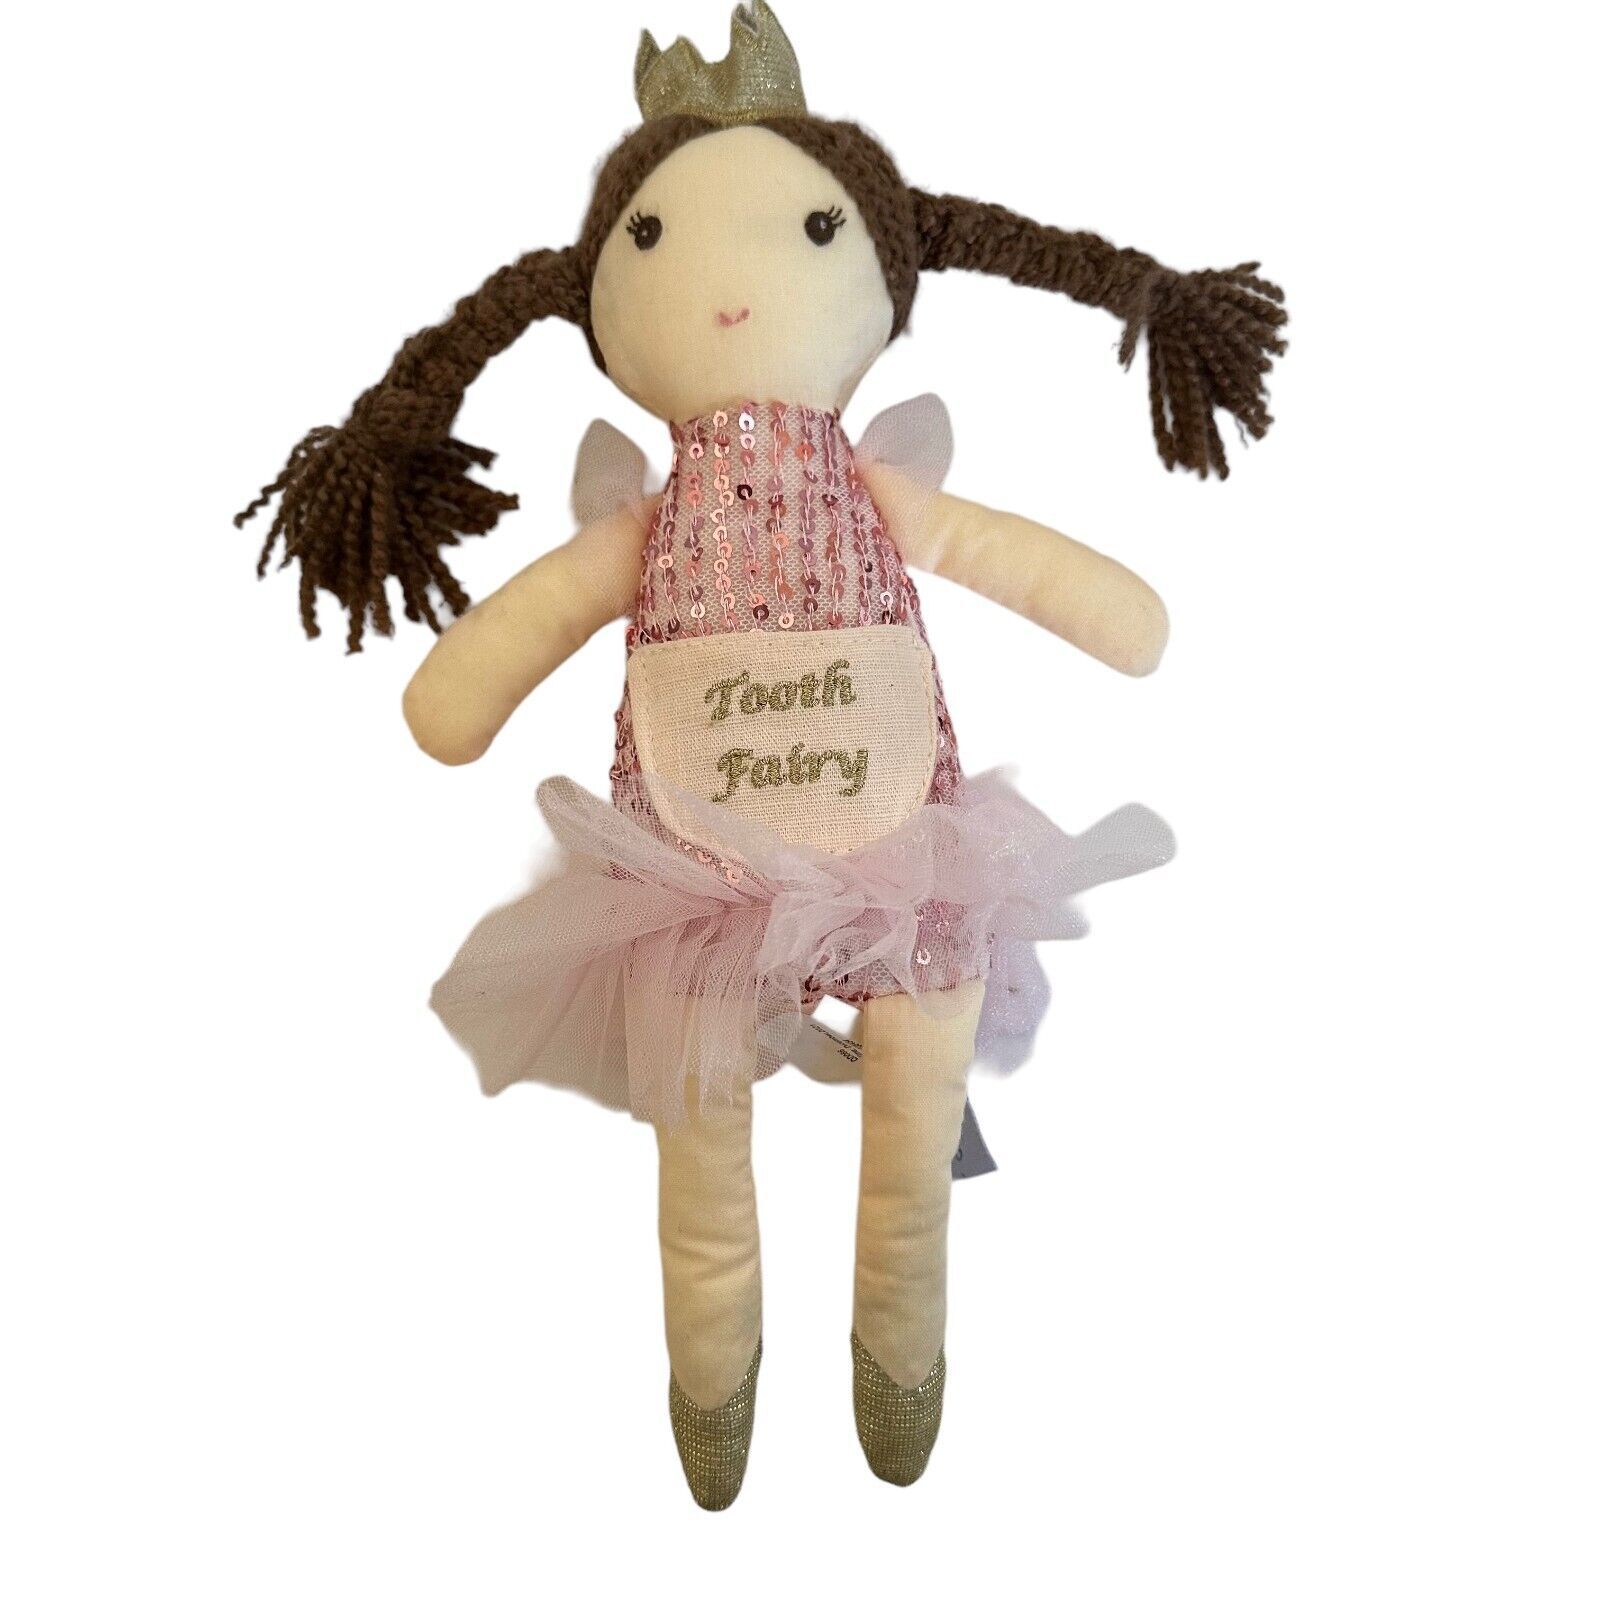 Maison Chic Tooth Fairy Baby Doll Pink Plush Stuffed Toy Braided Hair With Crown - $19.79